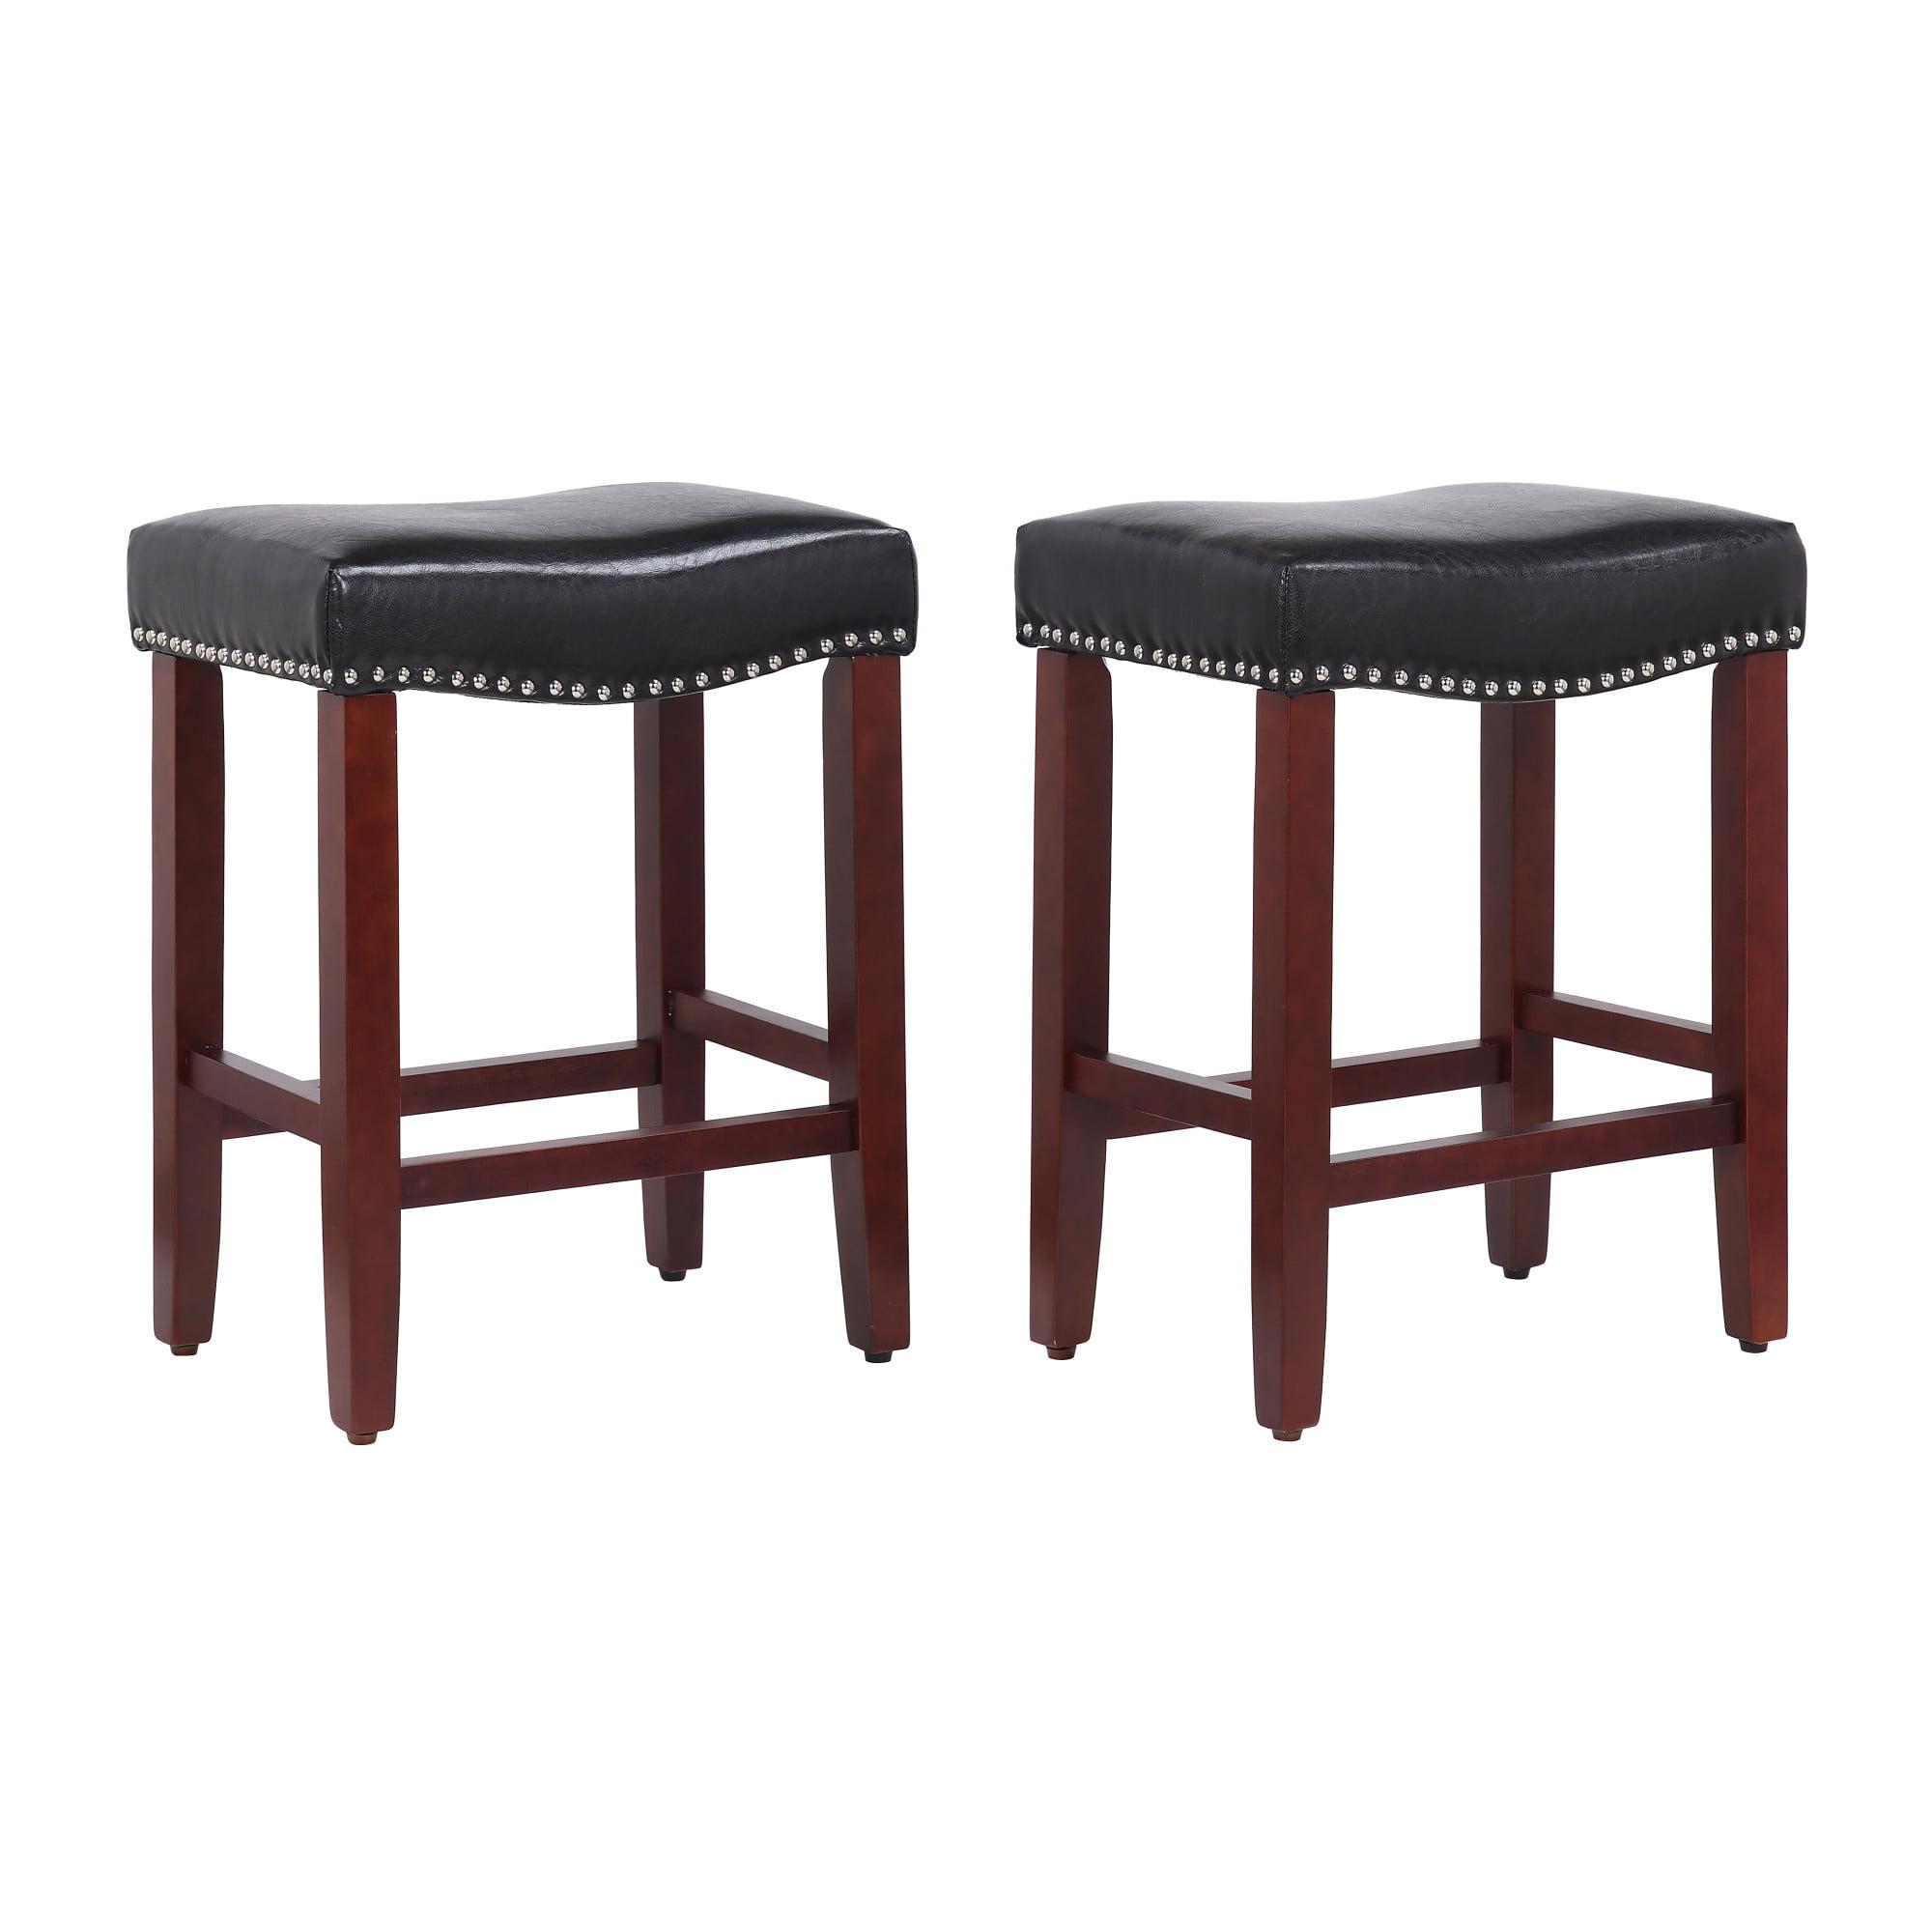 Cherry & Black 24" Saddle Style Wooden Bar Stool with Nail Head Trim